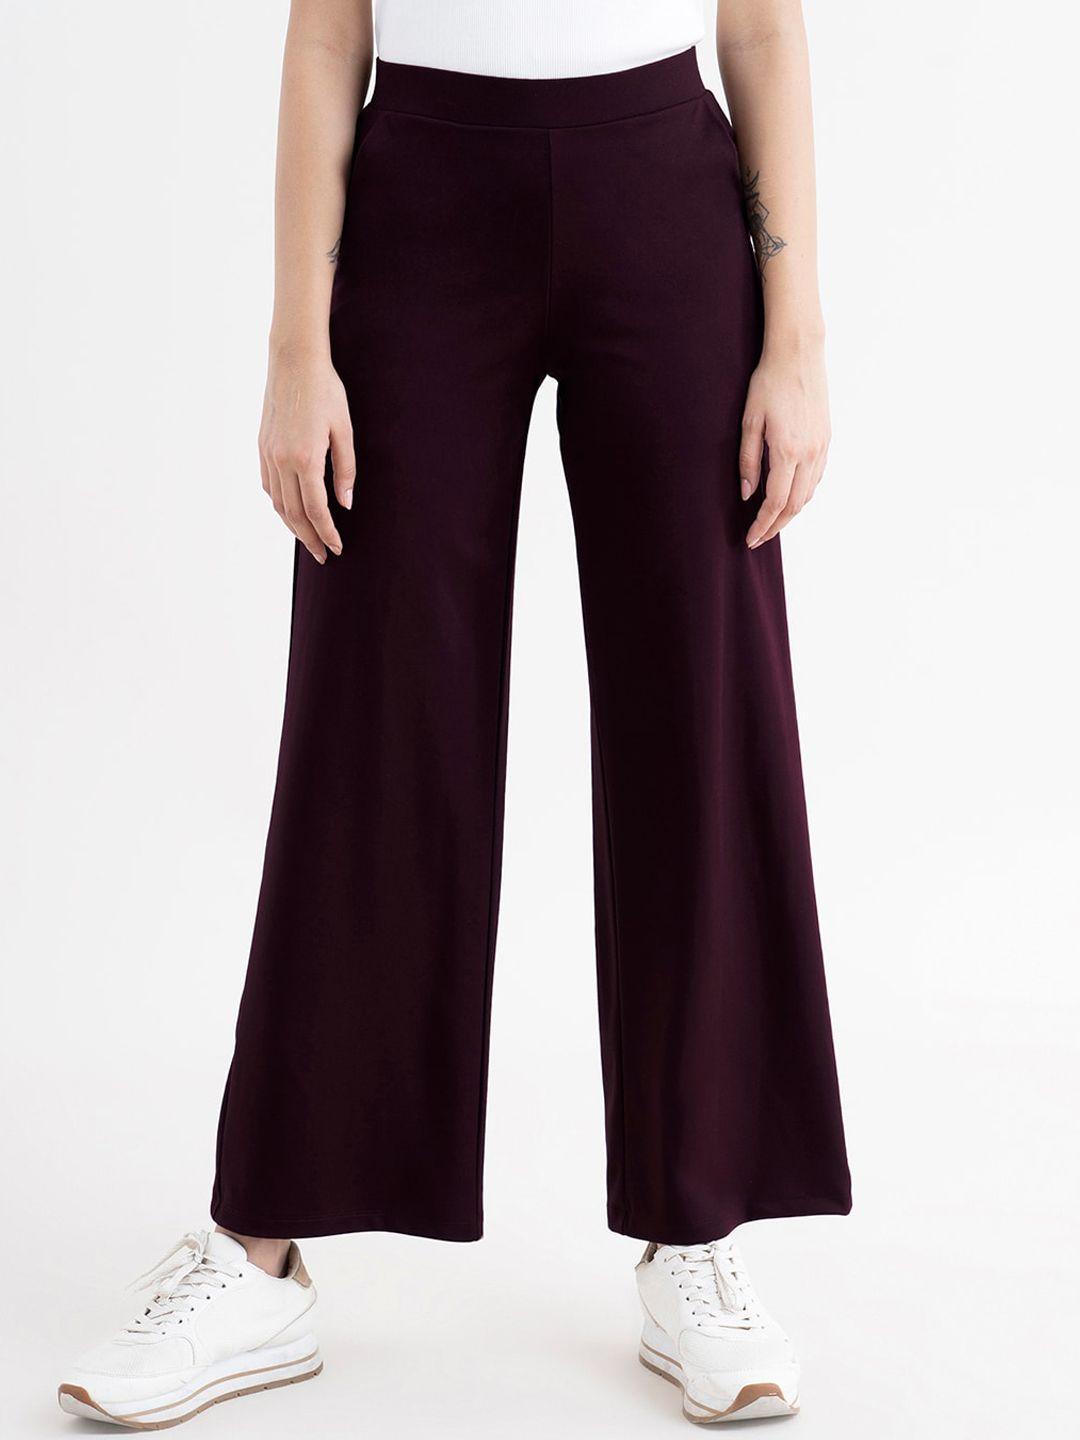 fablestreet women livin air flared high-rise trousers